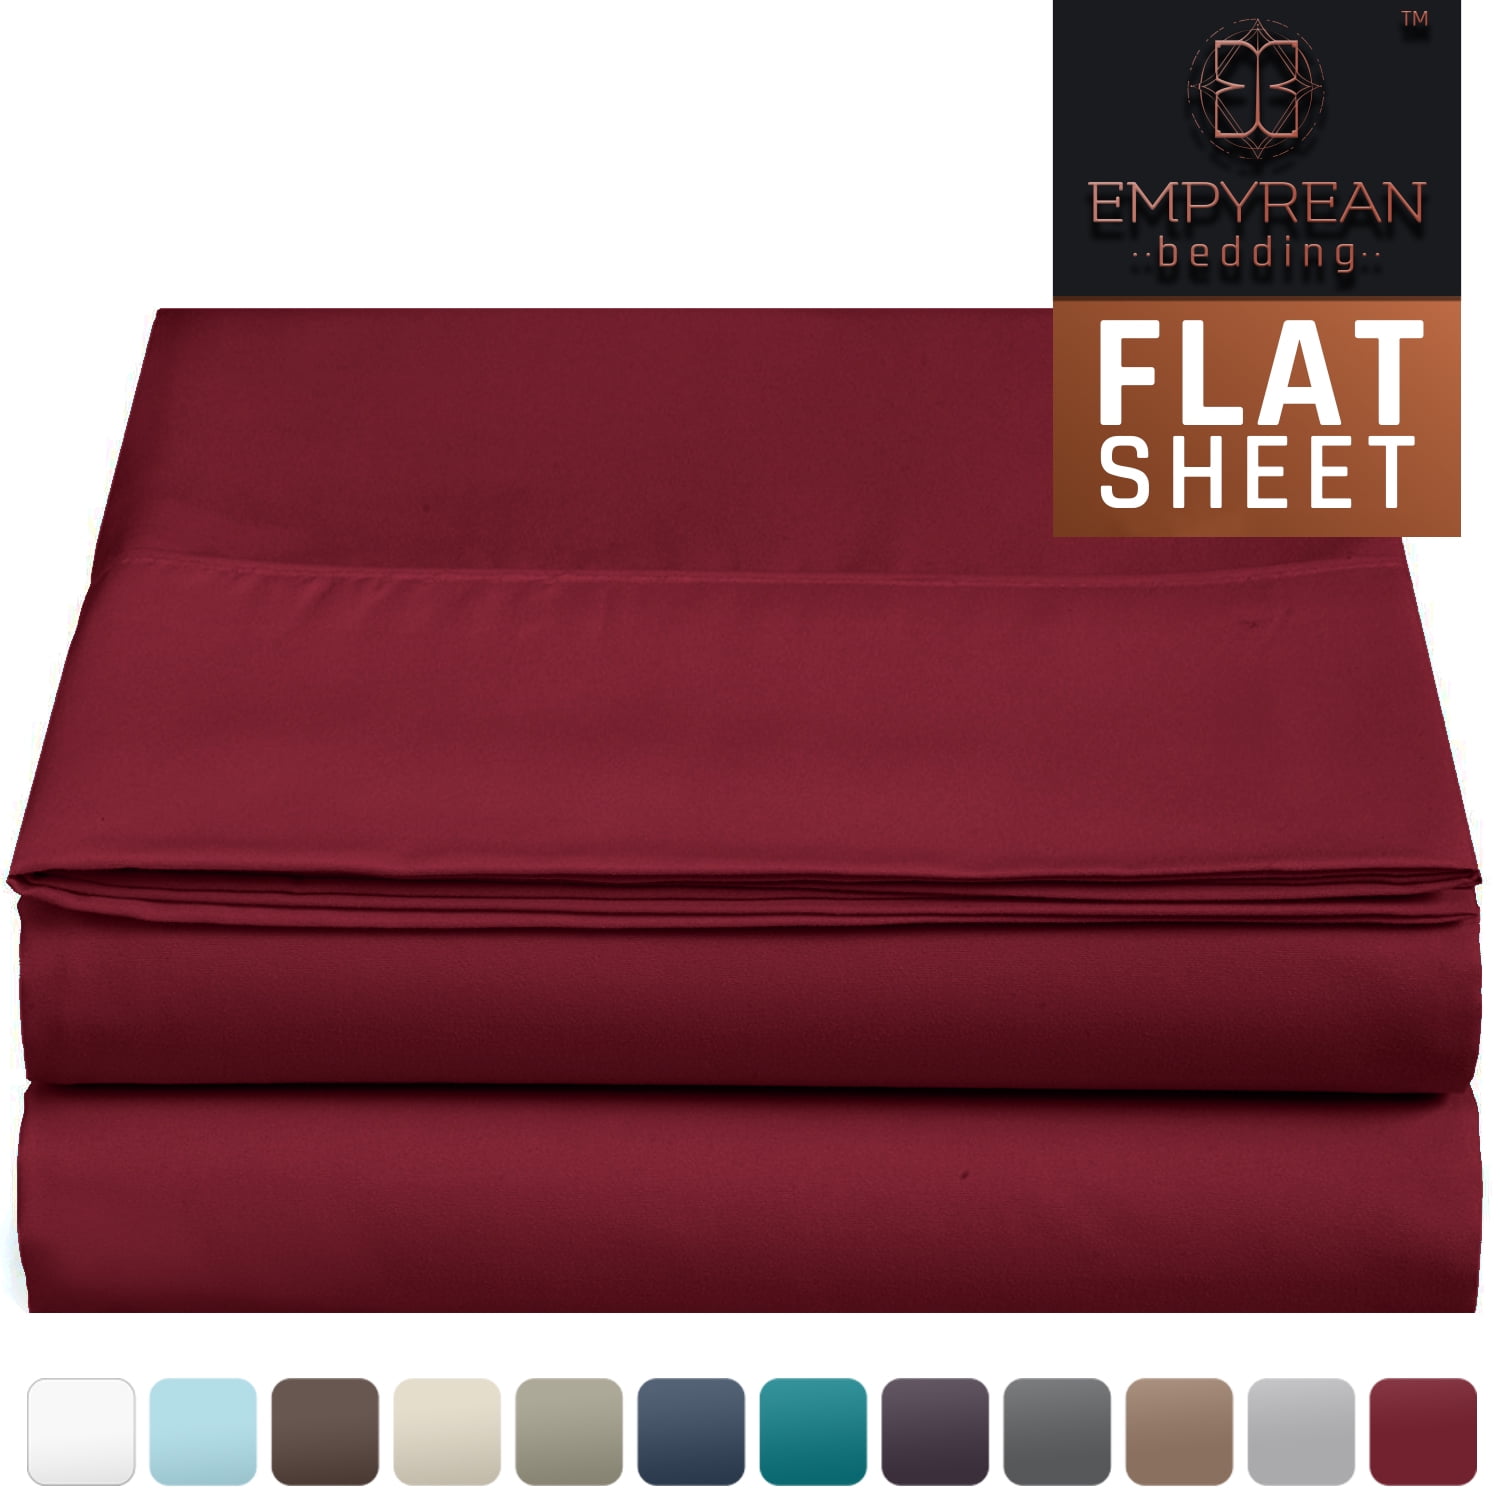 Empyrean Bedding Premium Flat Sheets – 2-Pack “110 GSM” Top Bed Sheets  Double Brushed Microfiber Thick and Comfortable Flat Sheets Set, Luxurious  & Soft Hotel Hypoallergenic, King, Charcoal Gray 